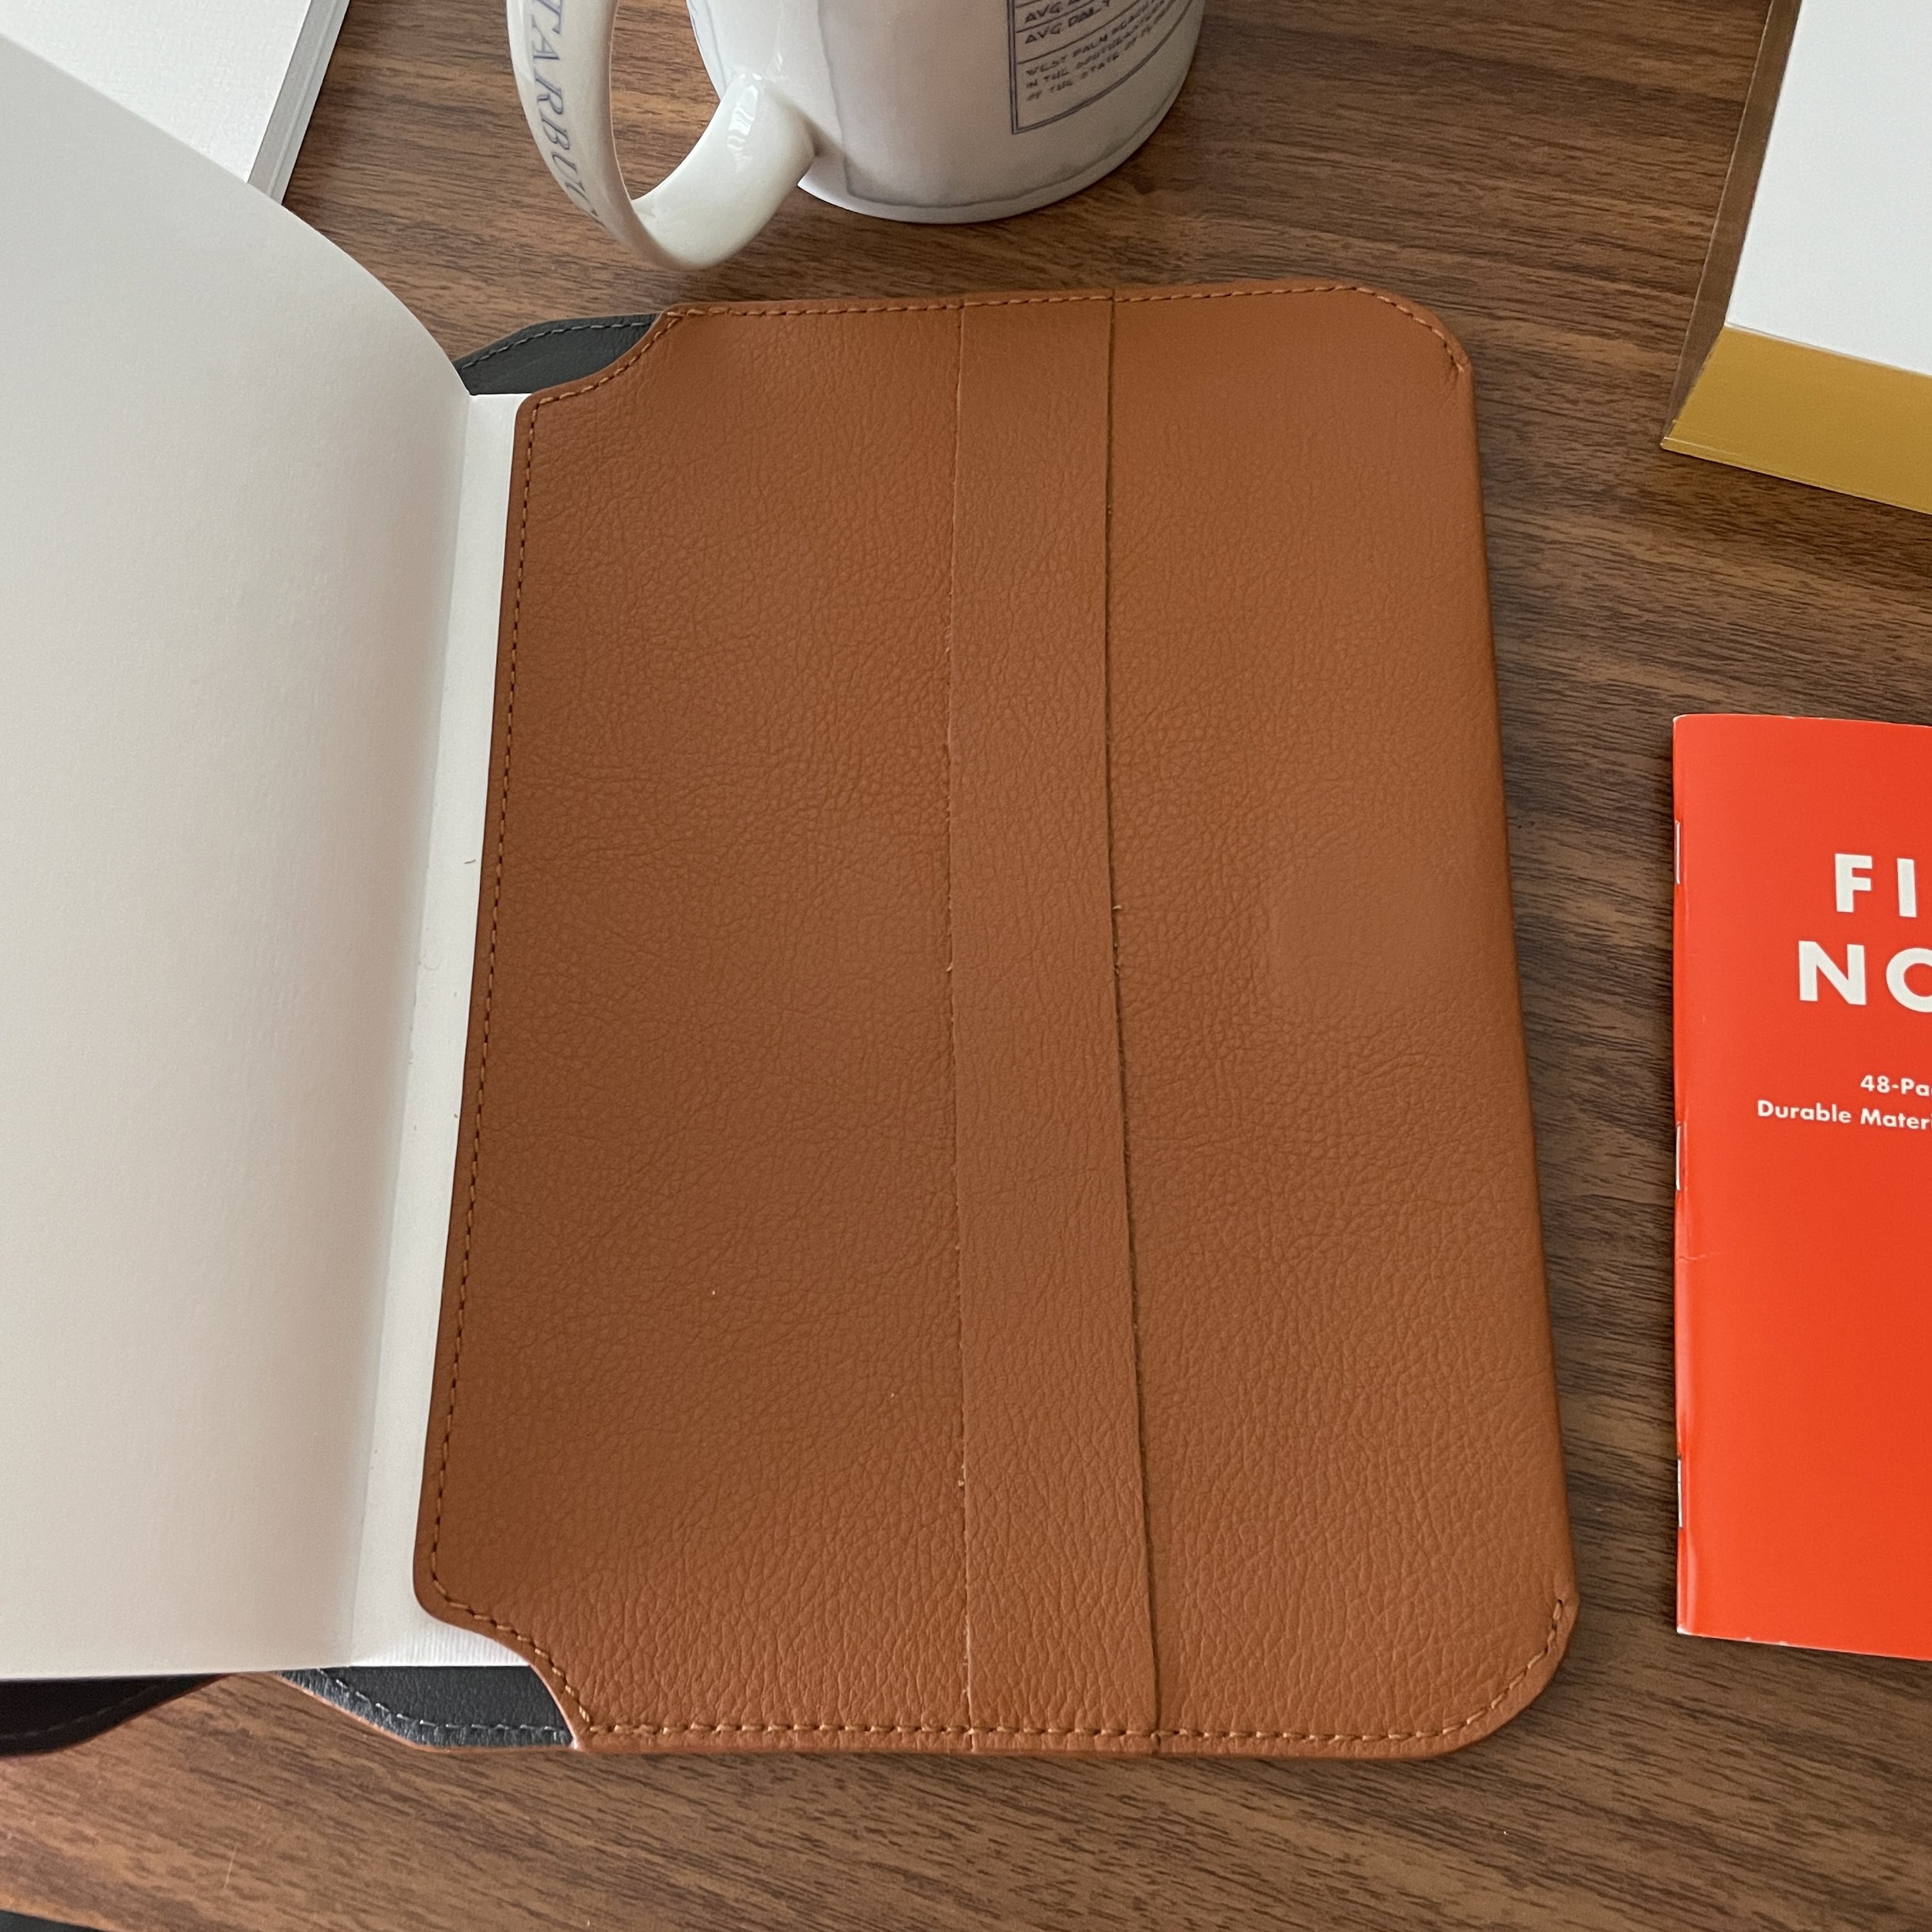 Folio Review: Harber London Leather Notebook Cover — The Gentleman